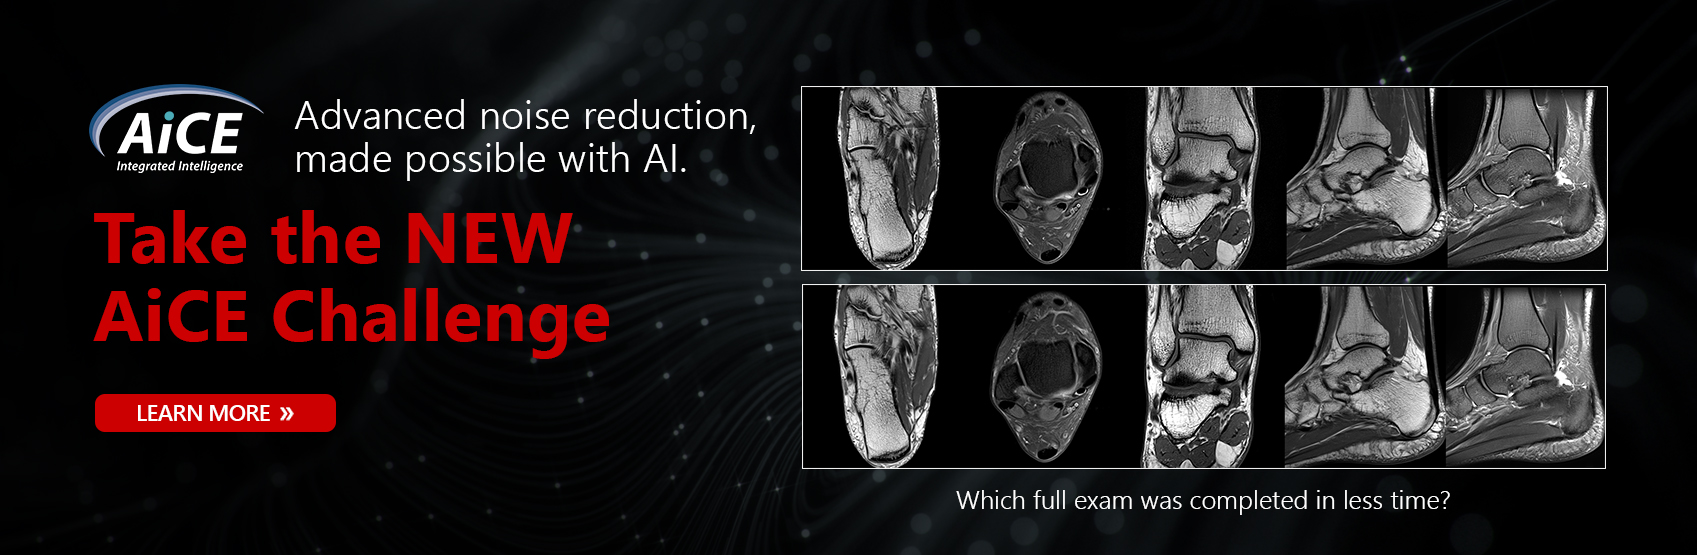 Advanced noise reduction, made possible with AI. Which full exam was completed in less time?  Take the NEW AiCE Challenge. | Learn More